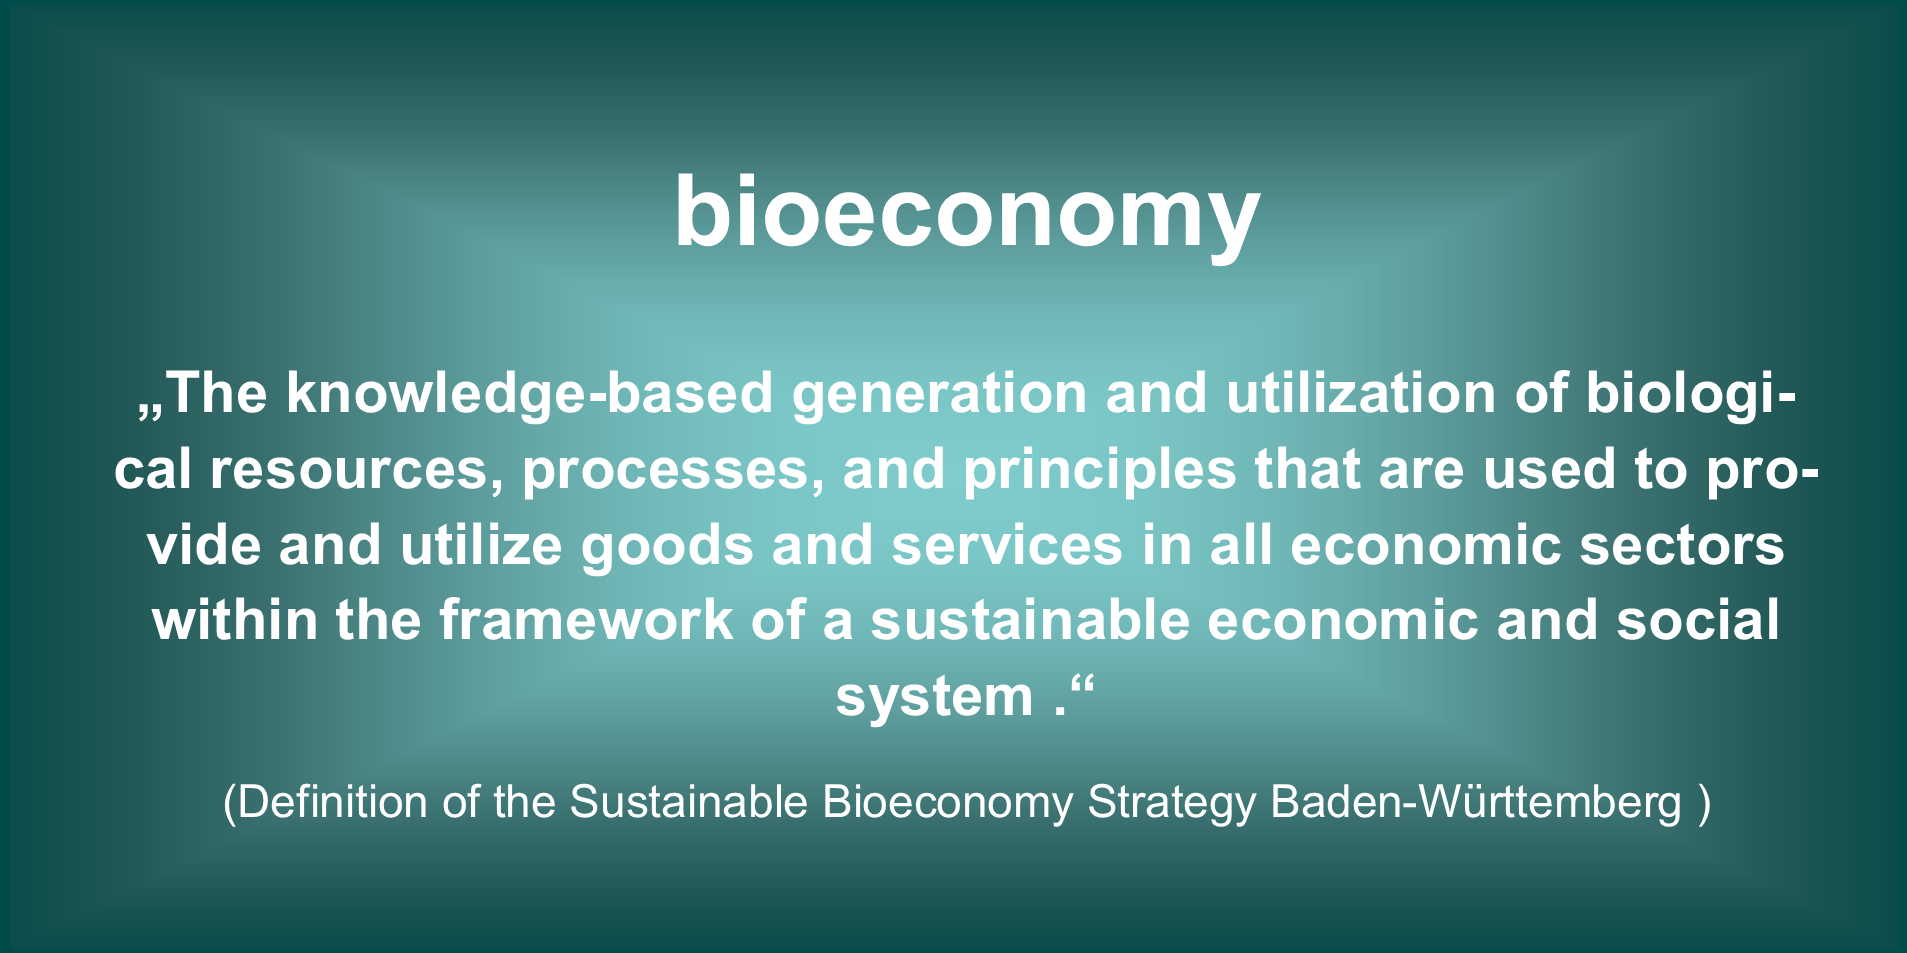 Definition of bioeconomy from the Sustainable Bioeconomy Strategy